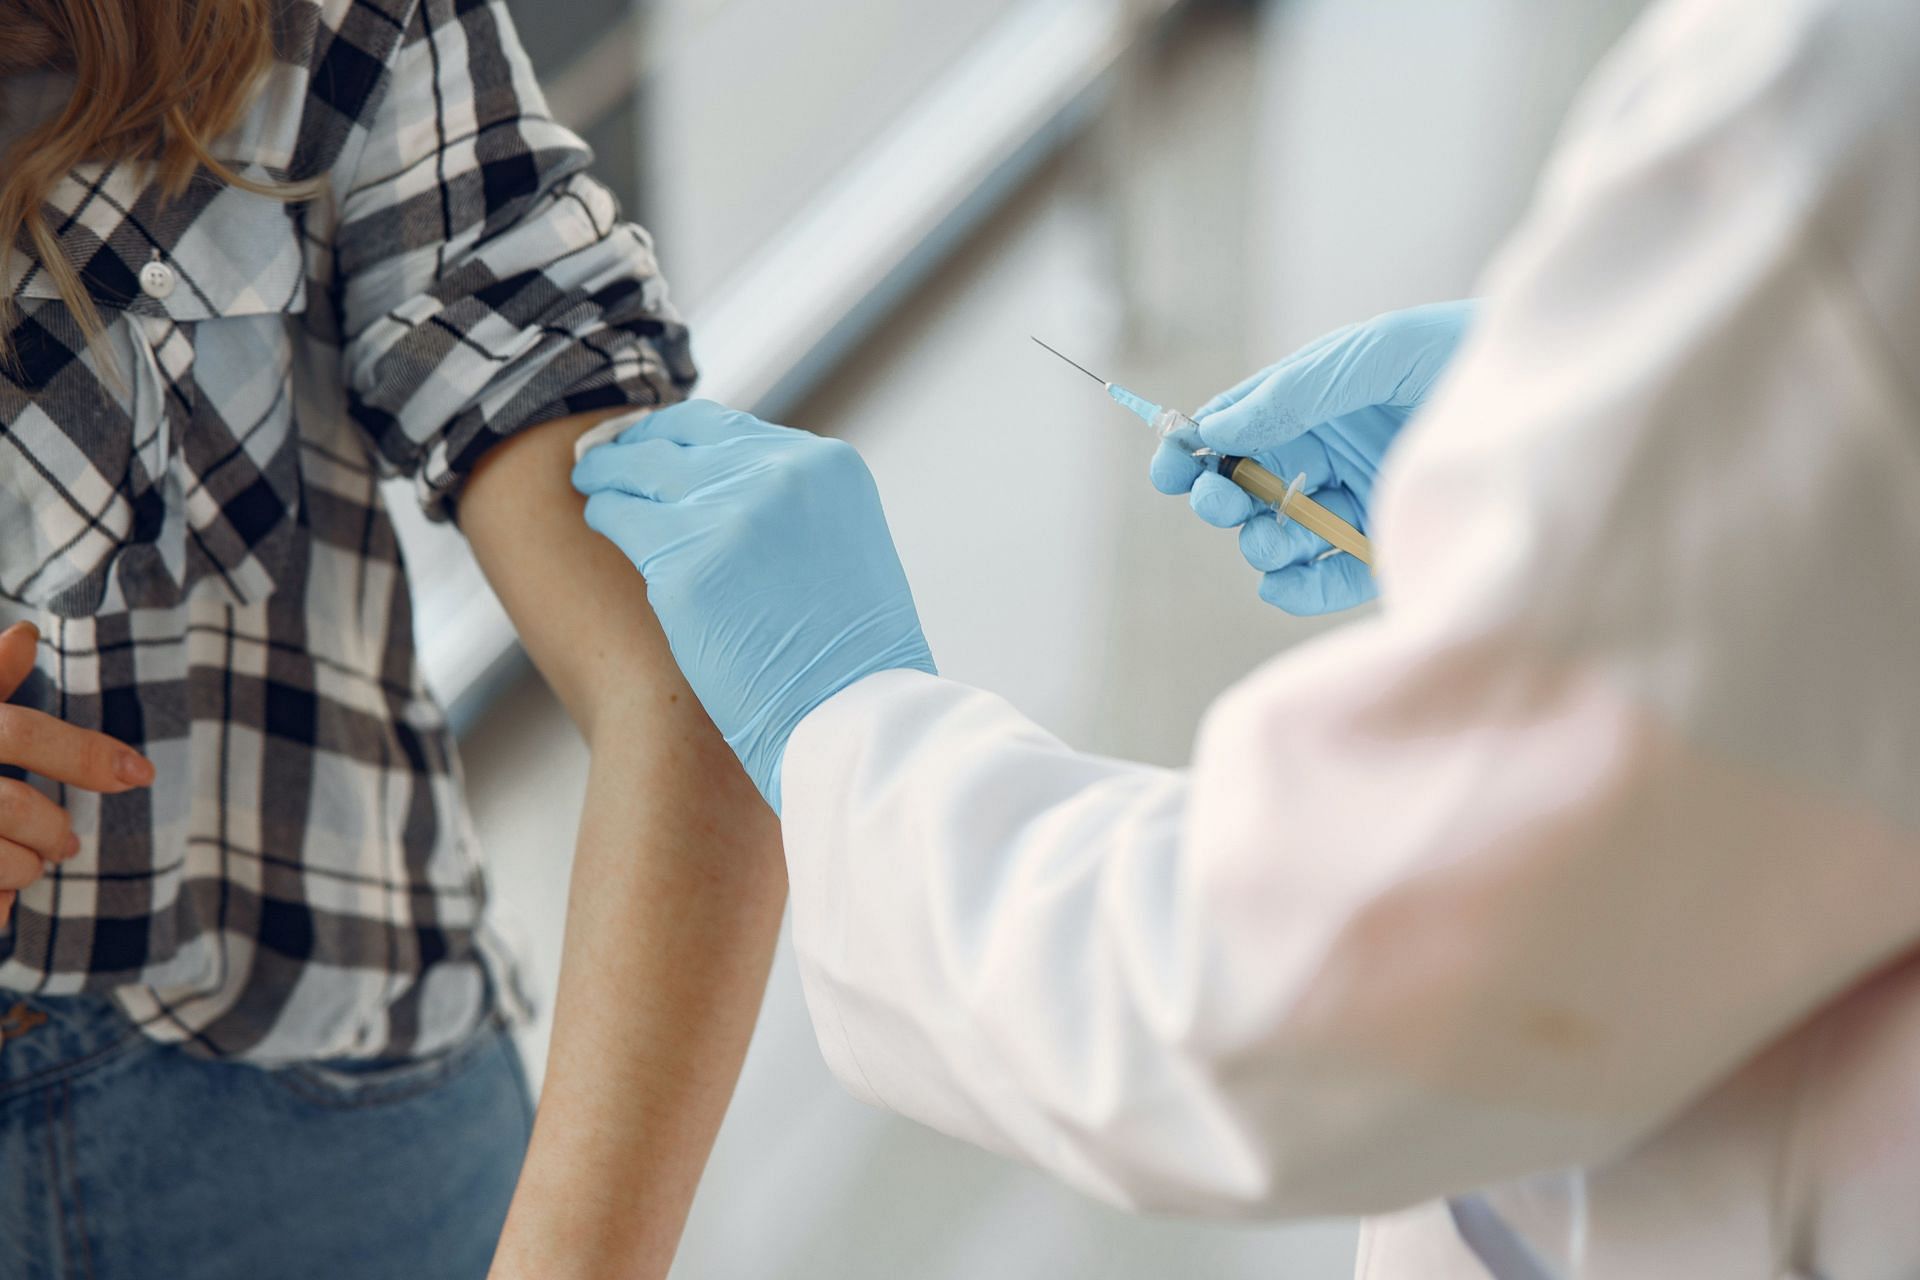 Getting vaccinated (Image source/ Pexels)